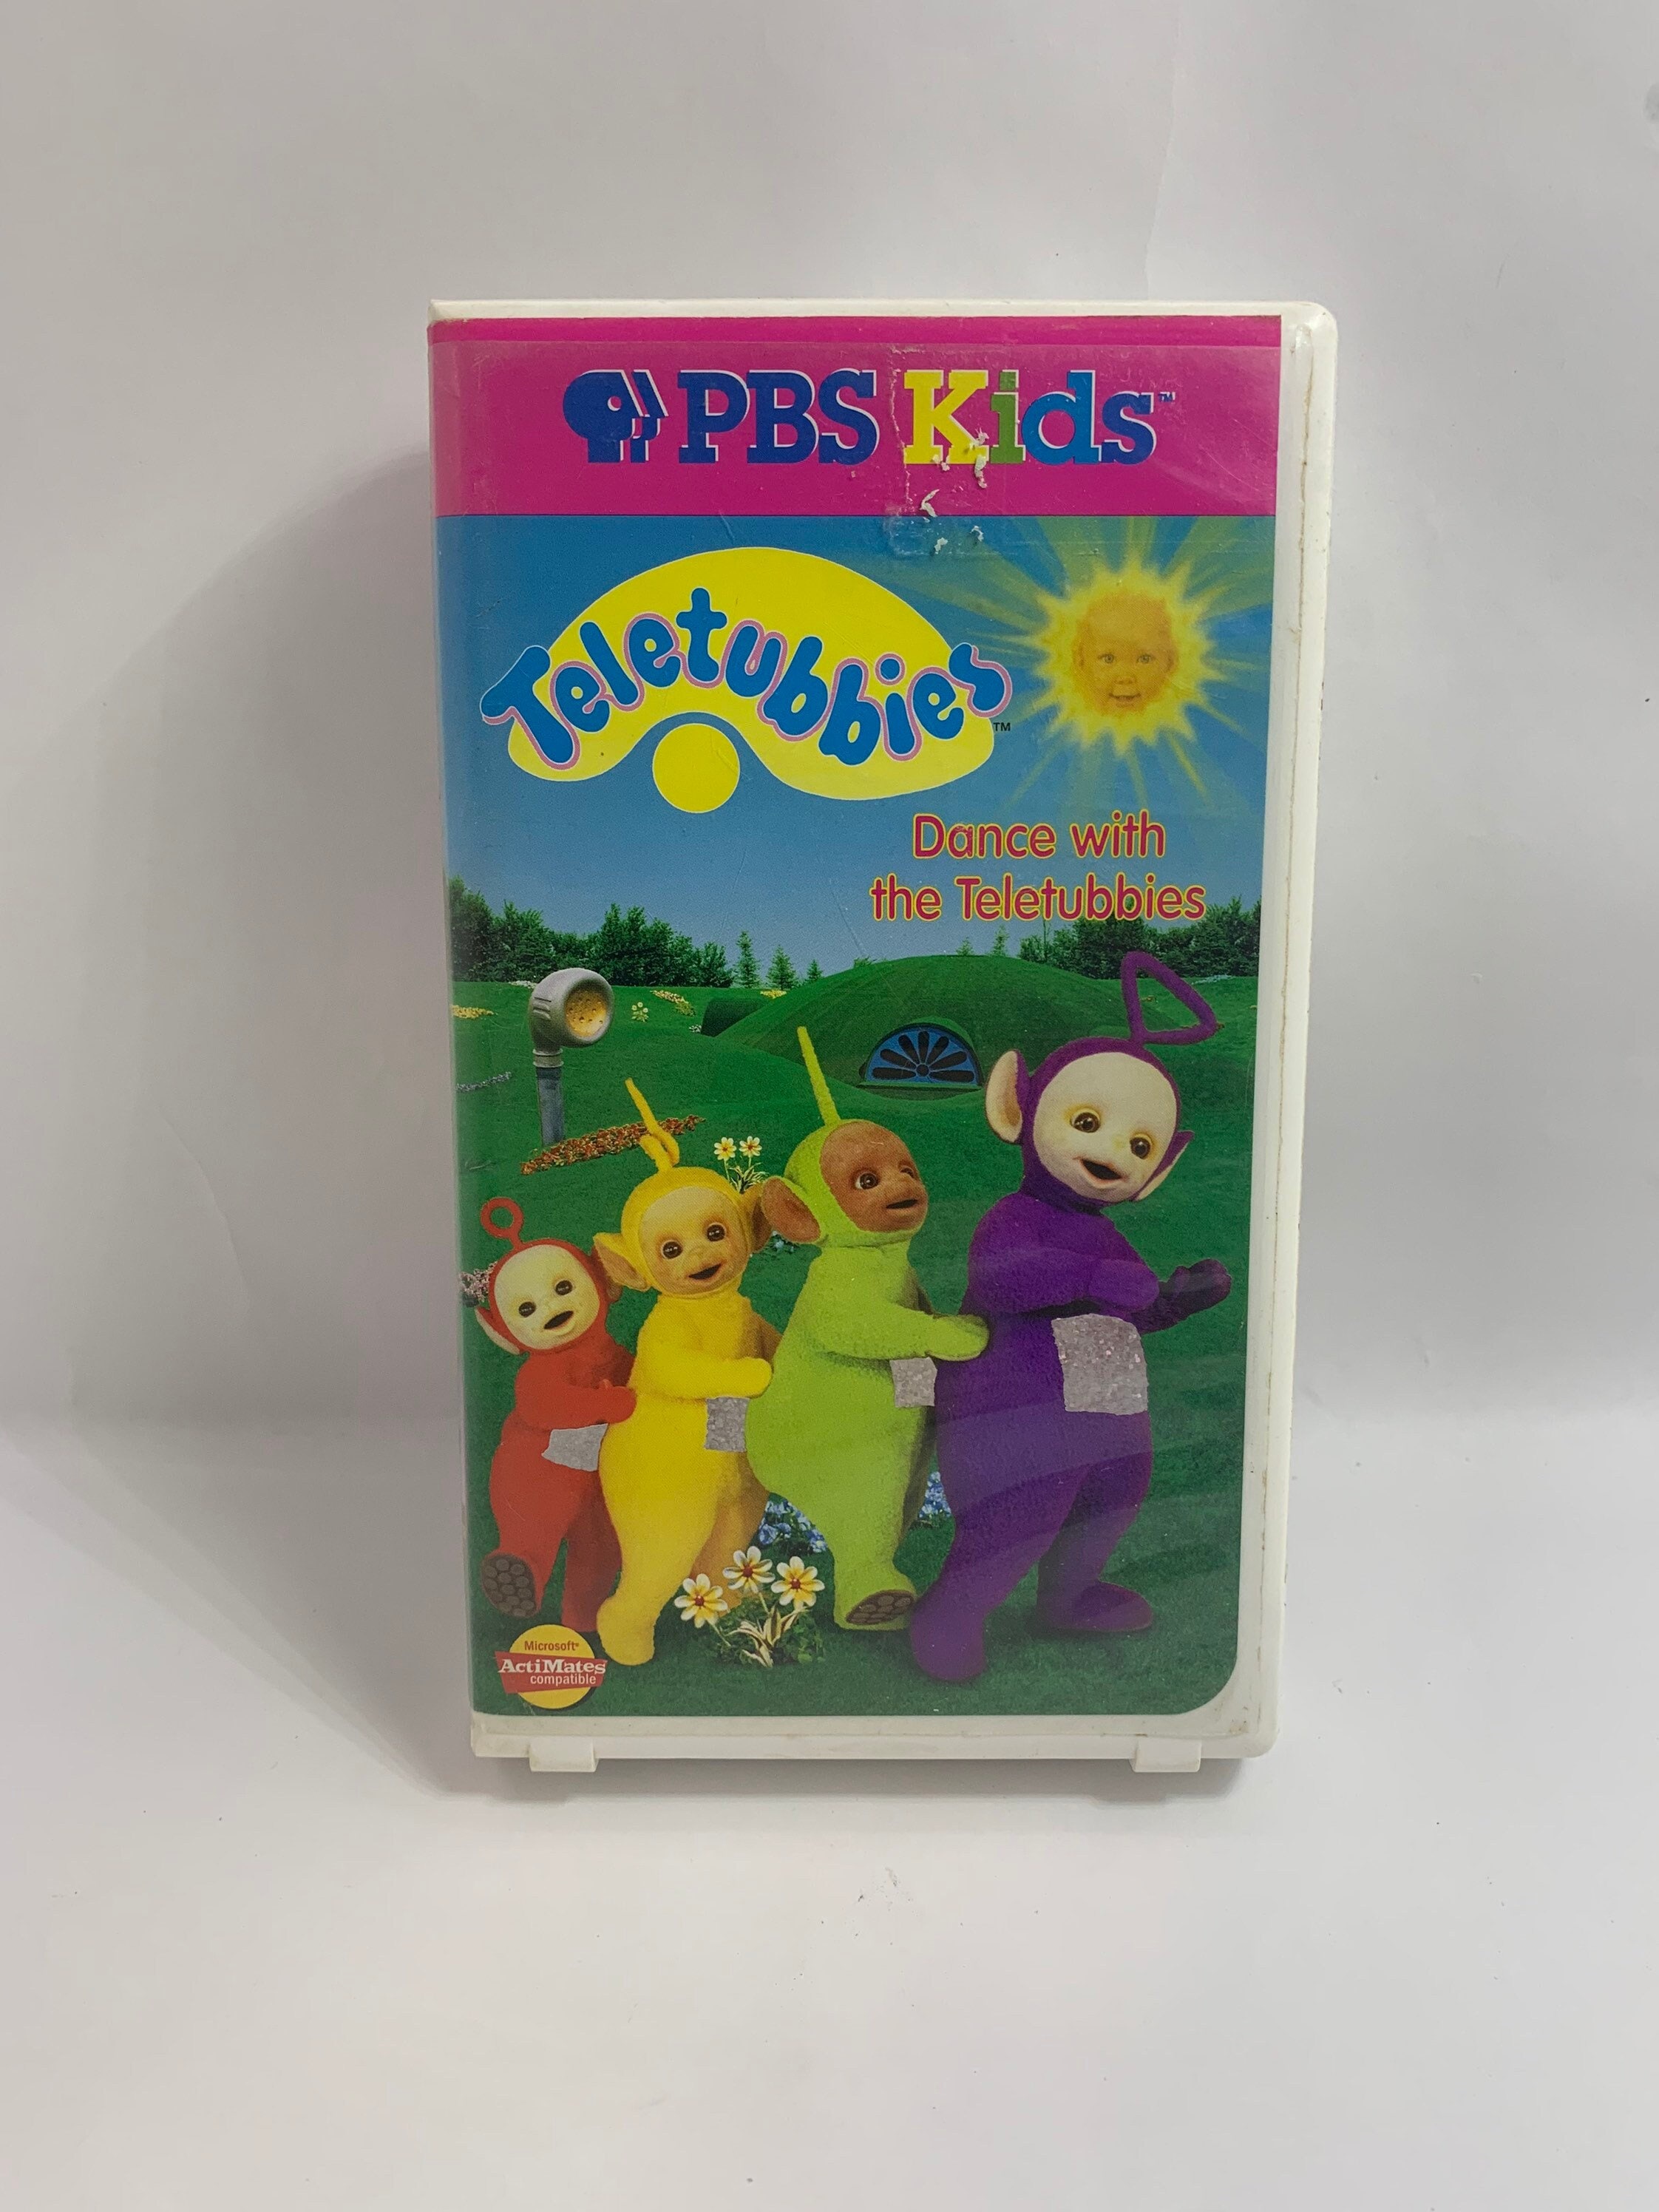 Vintage Teletubbies Dance With the Teletubbies VHS PBS Kids - Etsy Finland